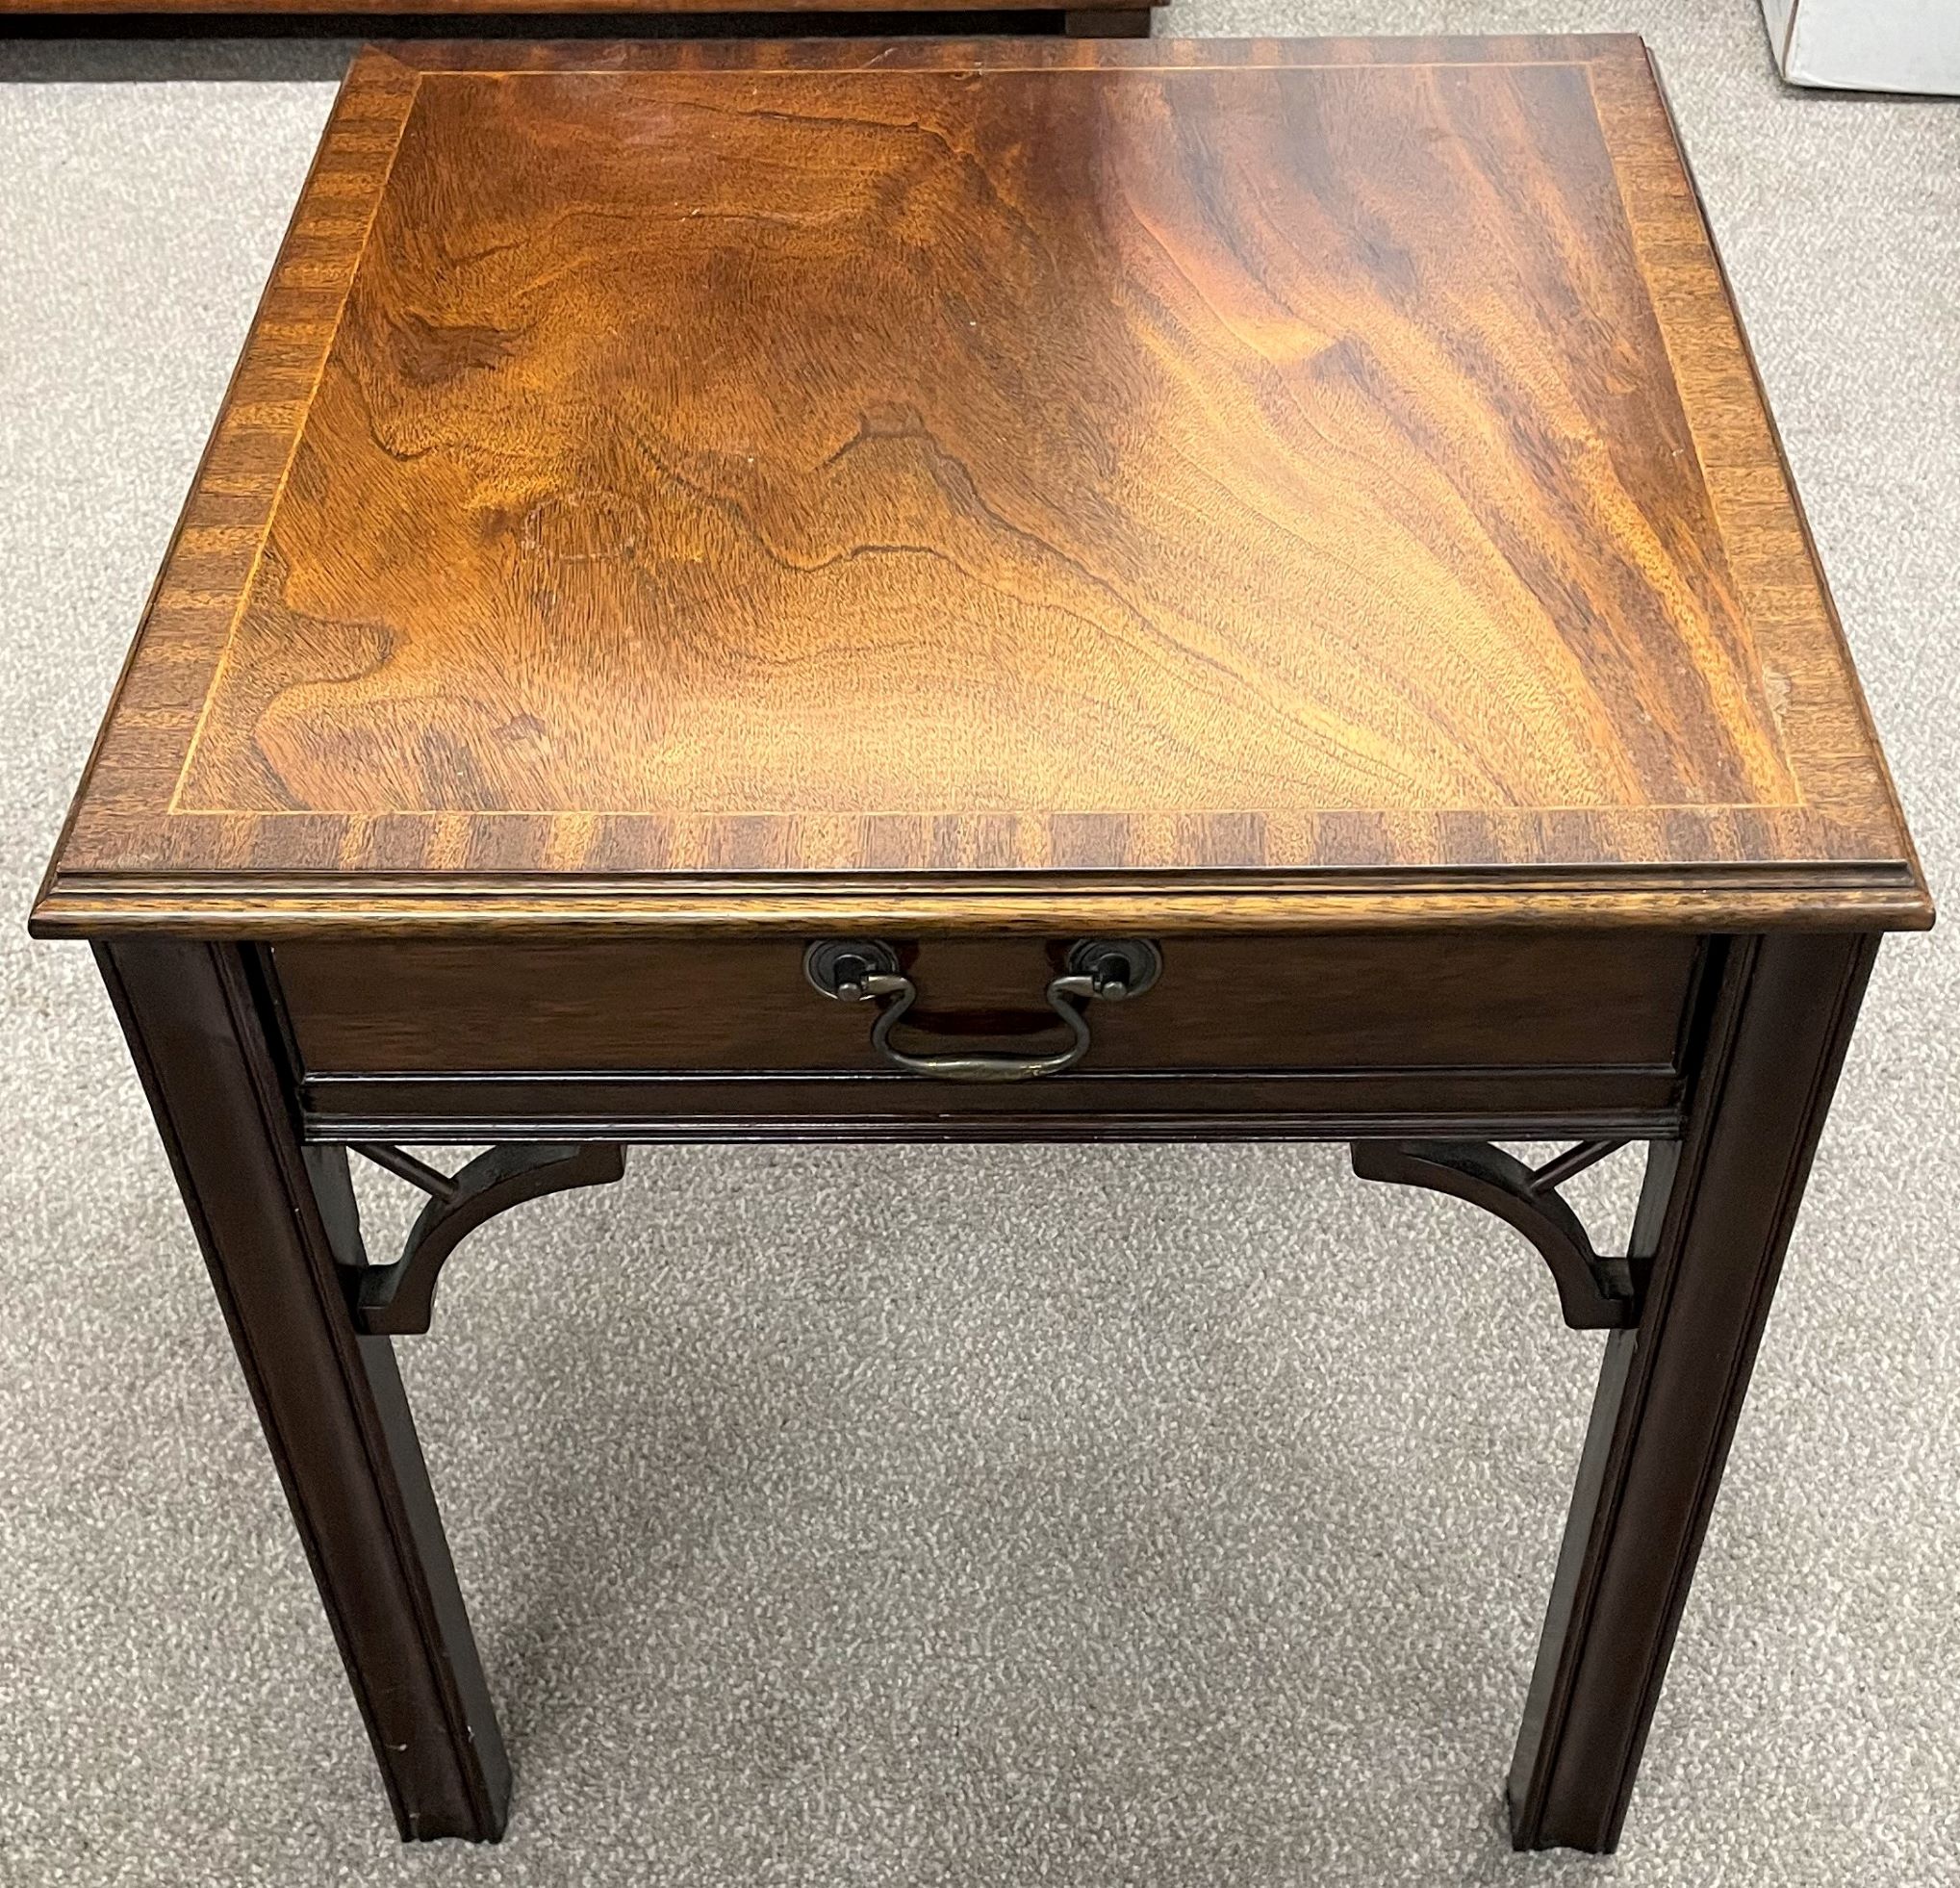 Small Georgian style coffee or side table Ht 54cm top 54 by 54cm